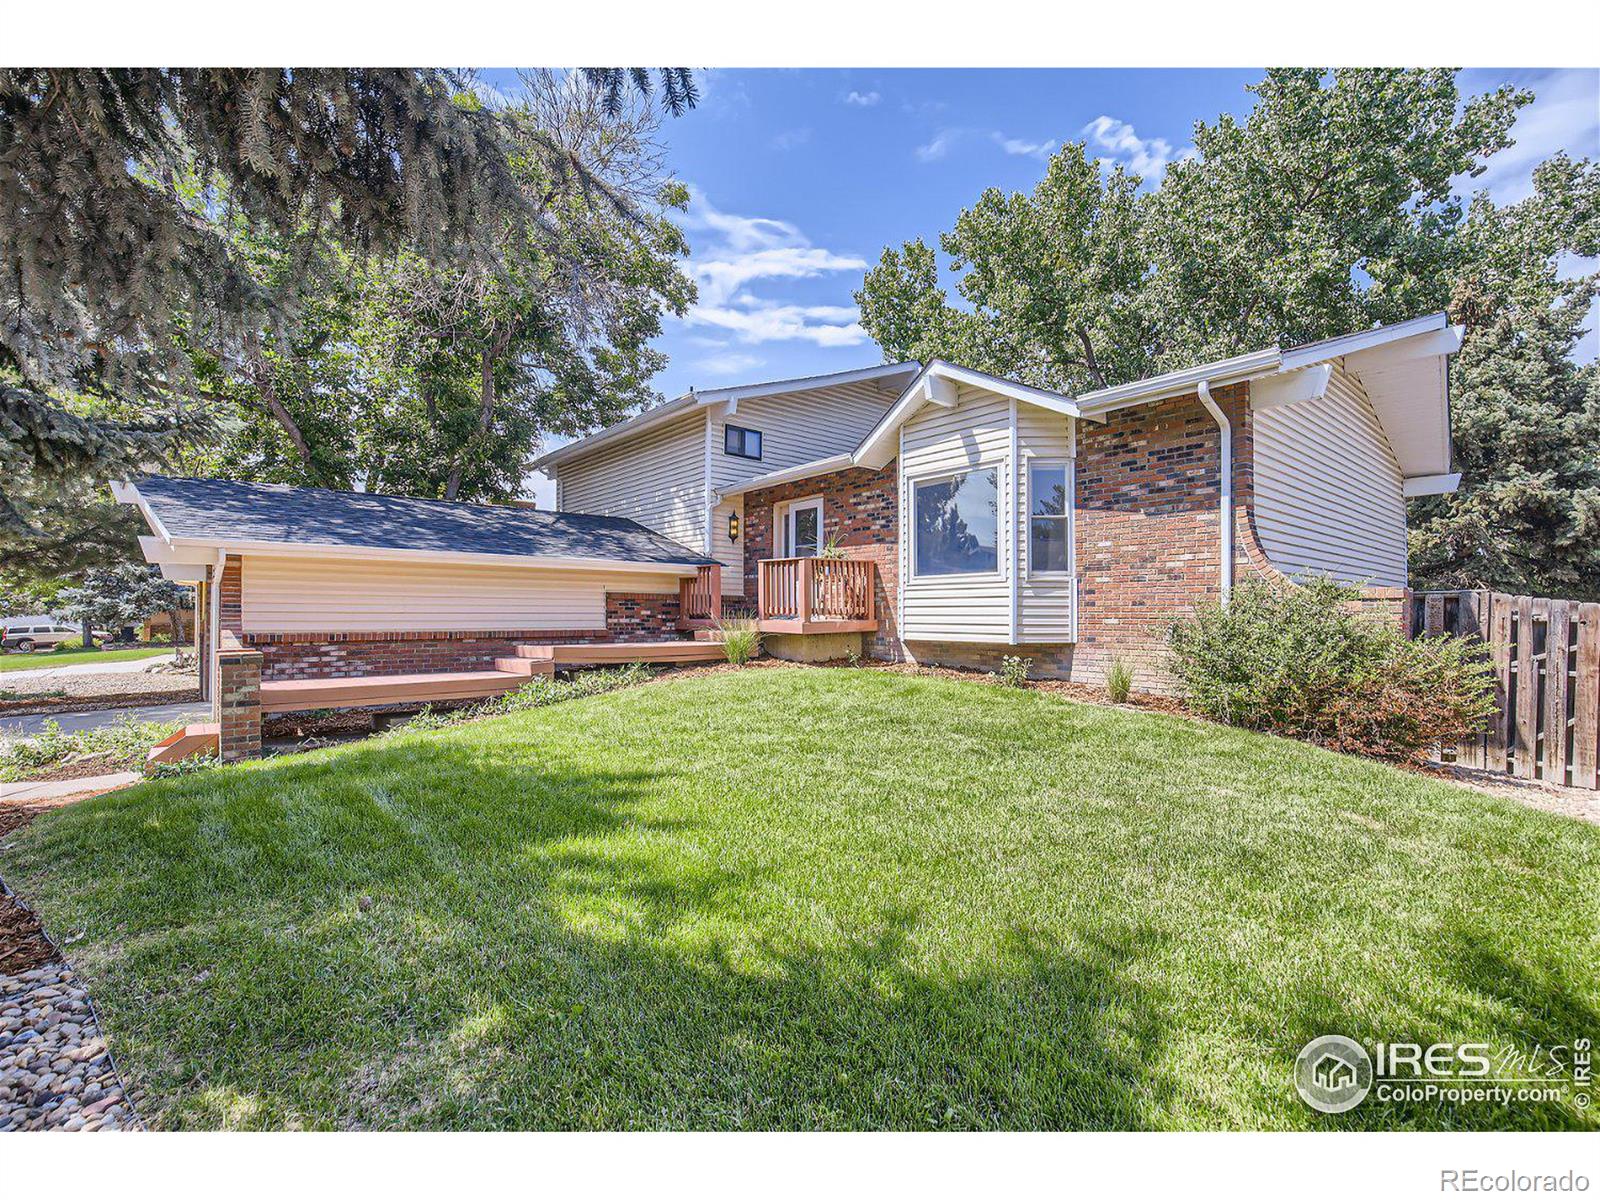 3616  kenyon lane, Longmont sold home. Closed on 2024-04-30 for $600,000.